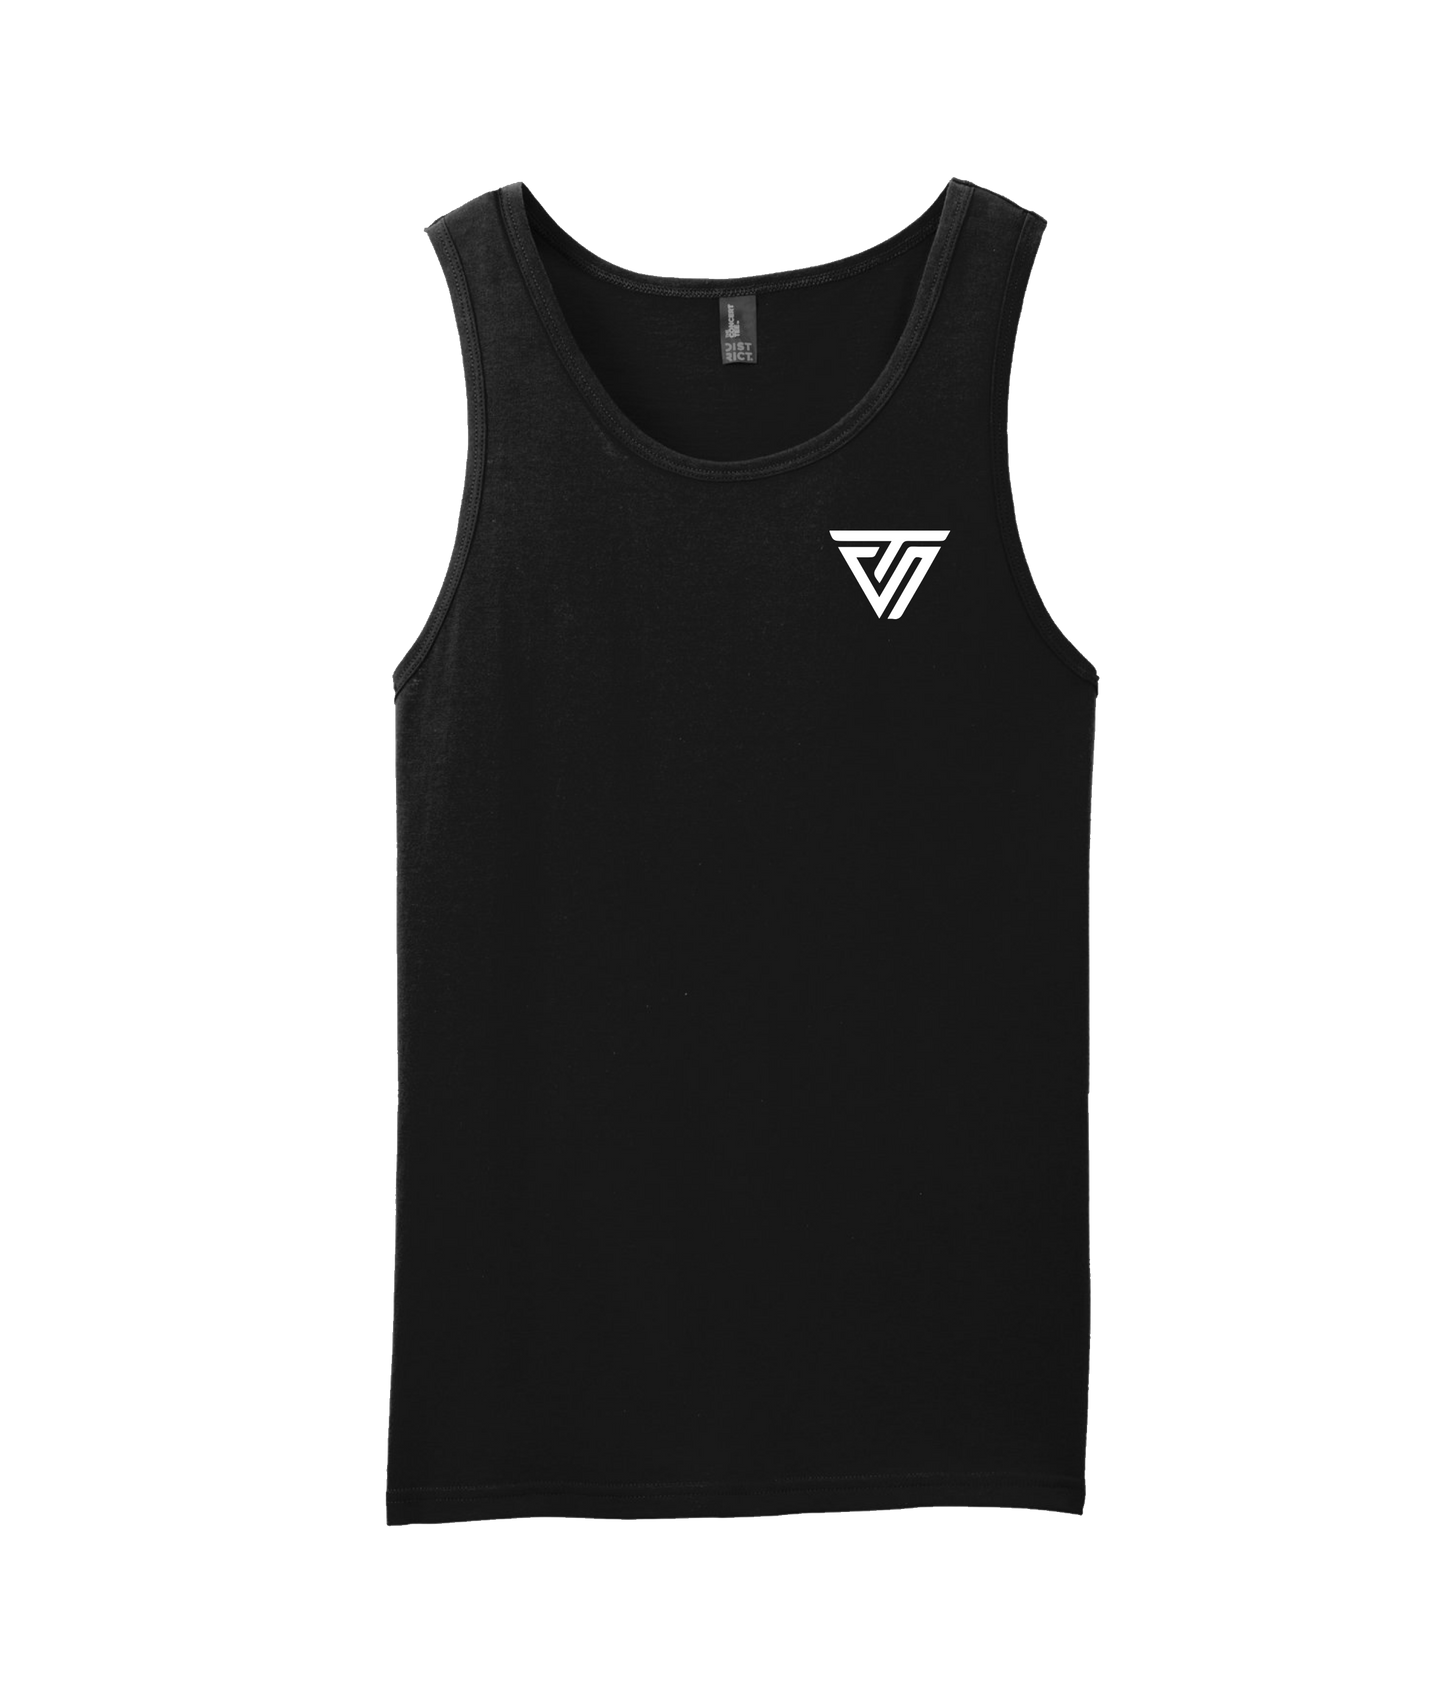 TheShift - Shift Front To Back - White Tank Top